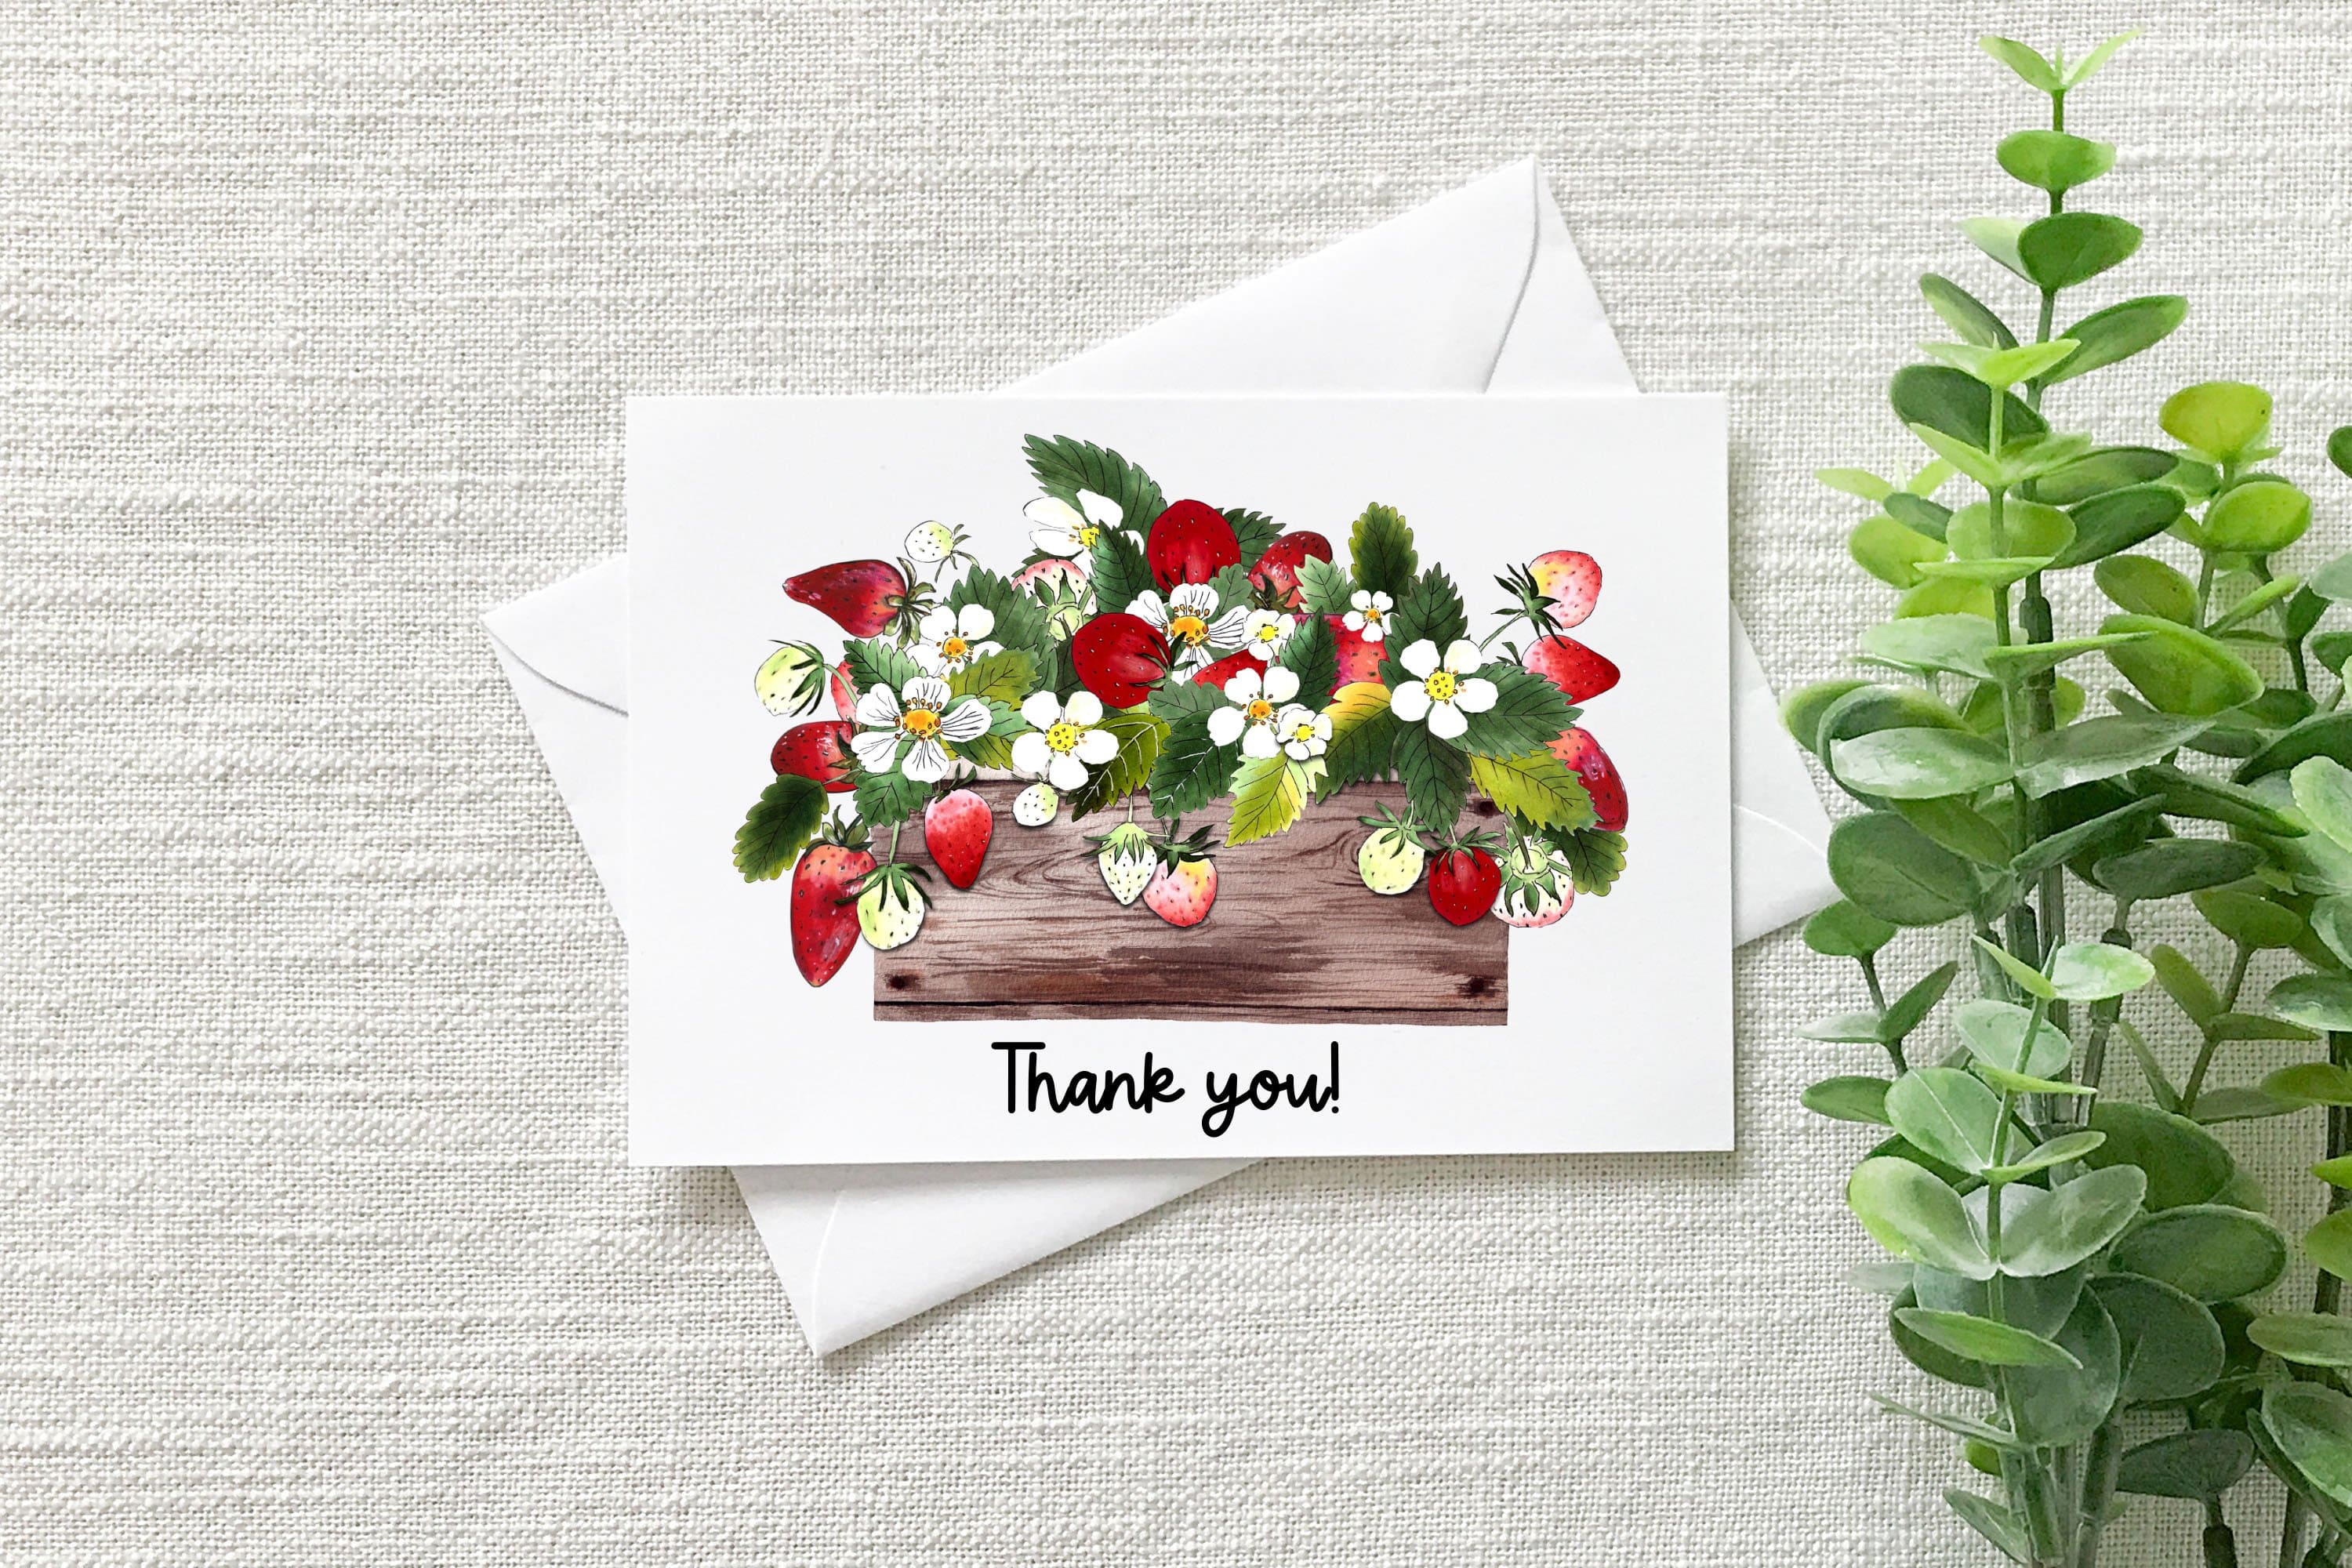 A basket with strawberry bushes is drawn on a white postcard with the word "Thank you".